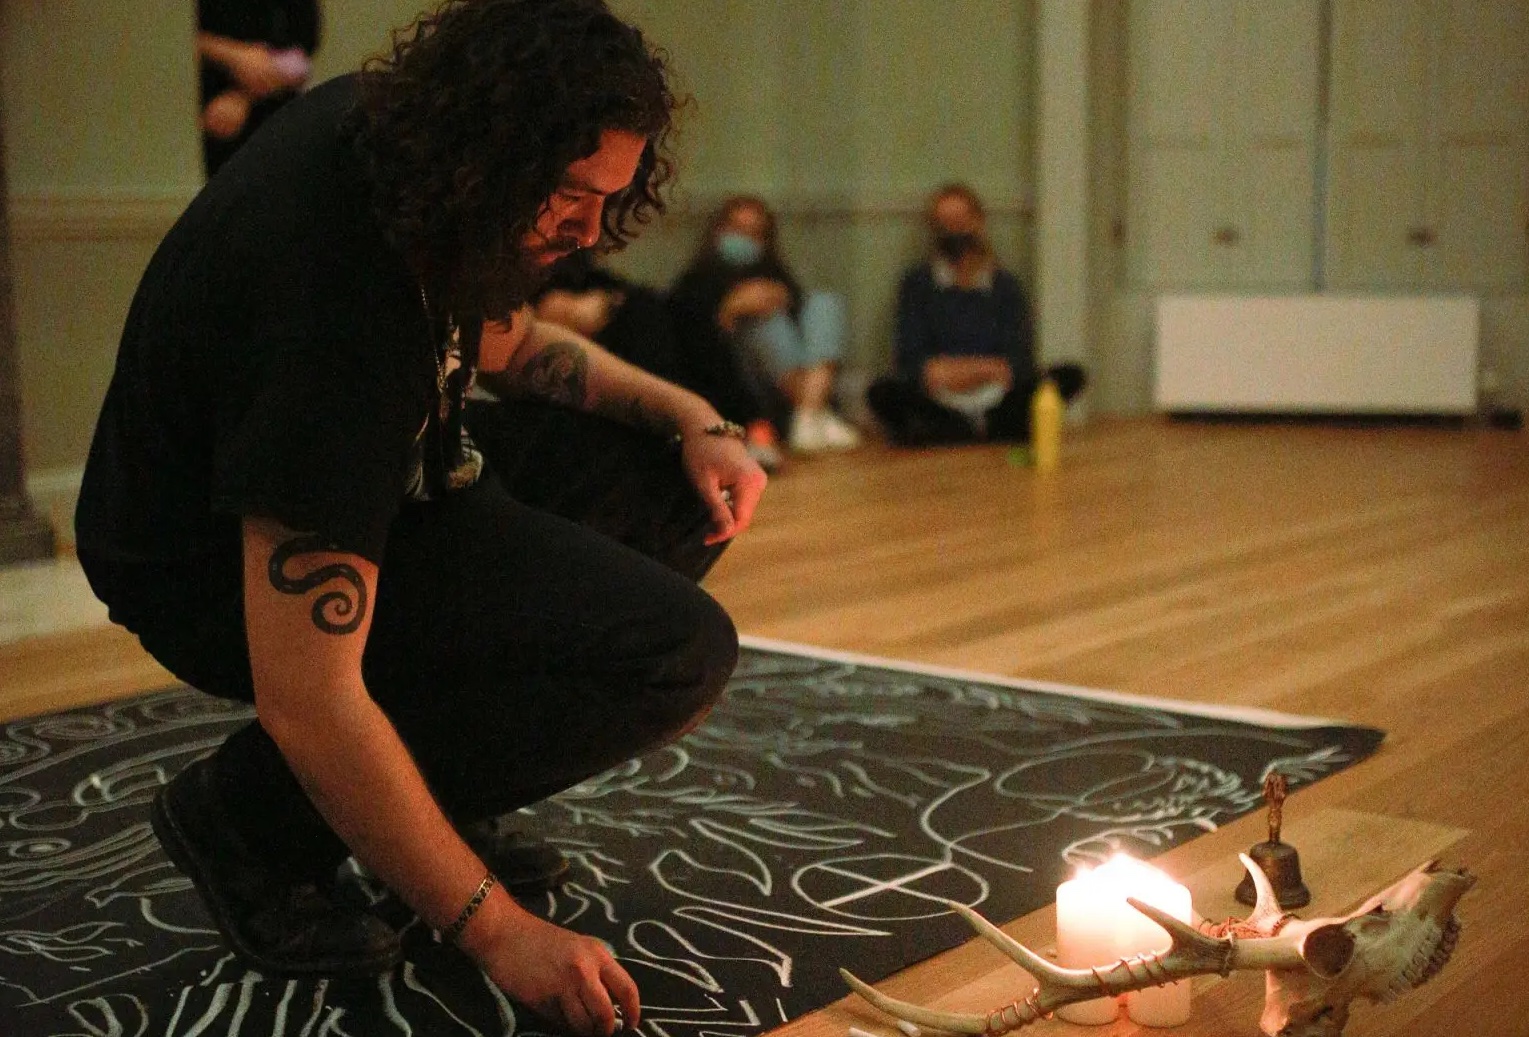 A man dressed in dark clothes in crouching down on a black mat with white designs on it with lit candles and a set of antlers & skull beside, all in a room on a wooden floor with a couple of people in the background.